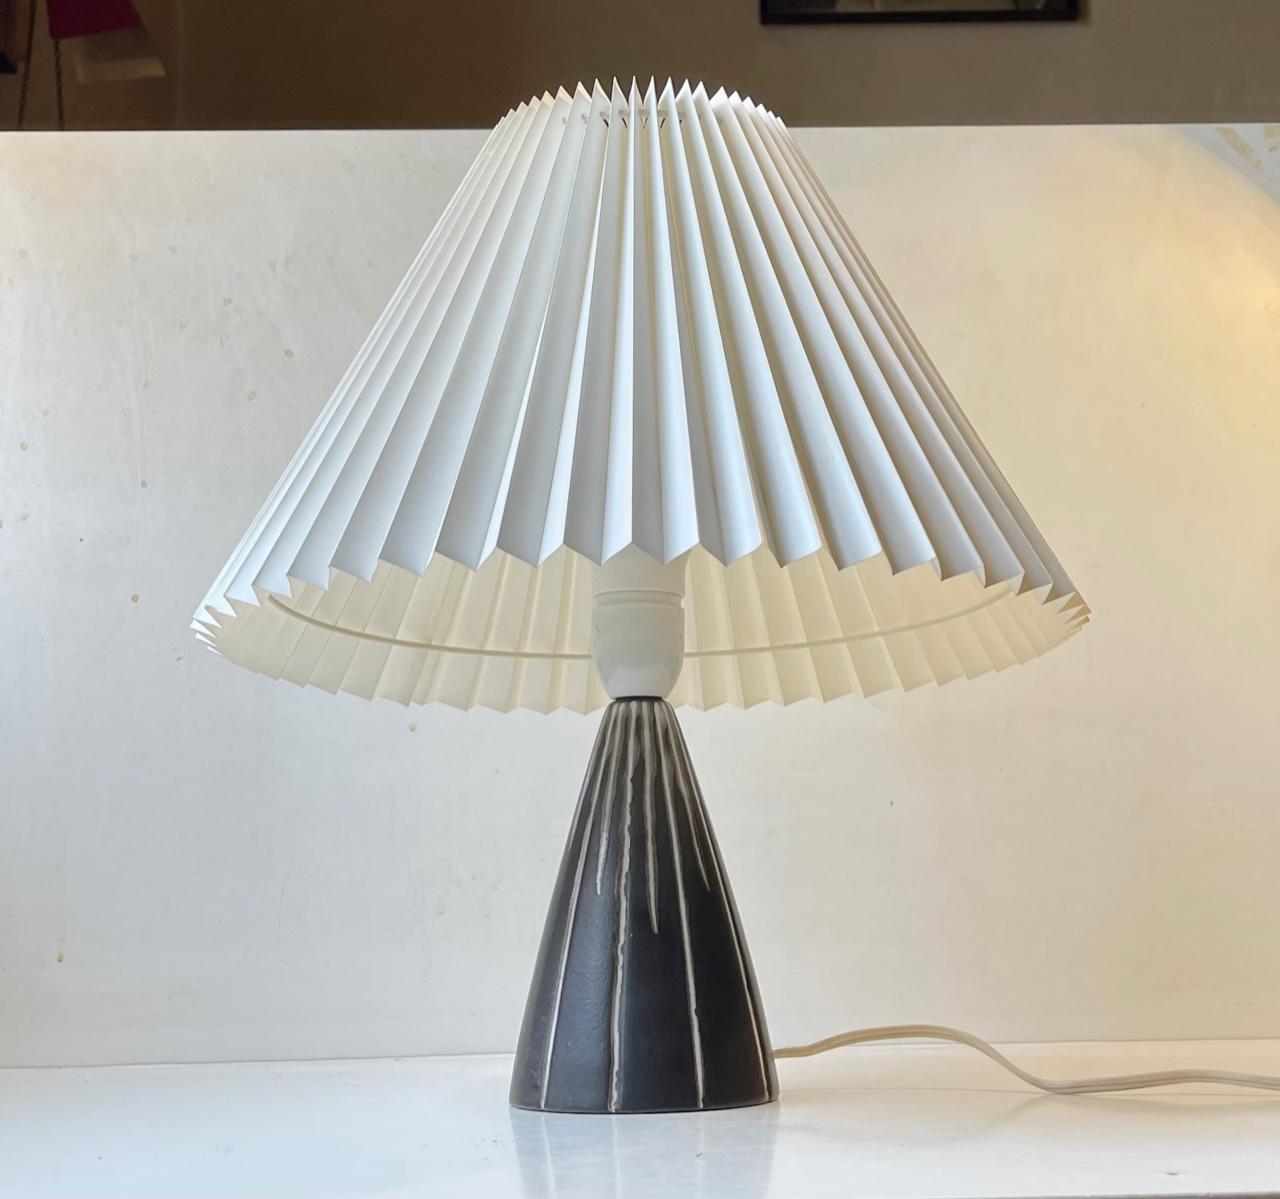 - Striped ceramic table lamp often attributed Svend Aage Holm-Sorensen and Svend Aage Madsen. - Slate grey main glaze decorated with vertical white stripes. - Manufactured by Søholm Keramik in Denmark from 1956-62 -Reminiscent in style to Ingrid